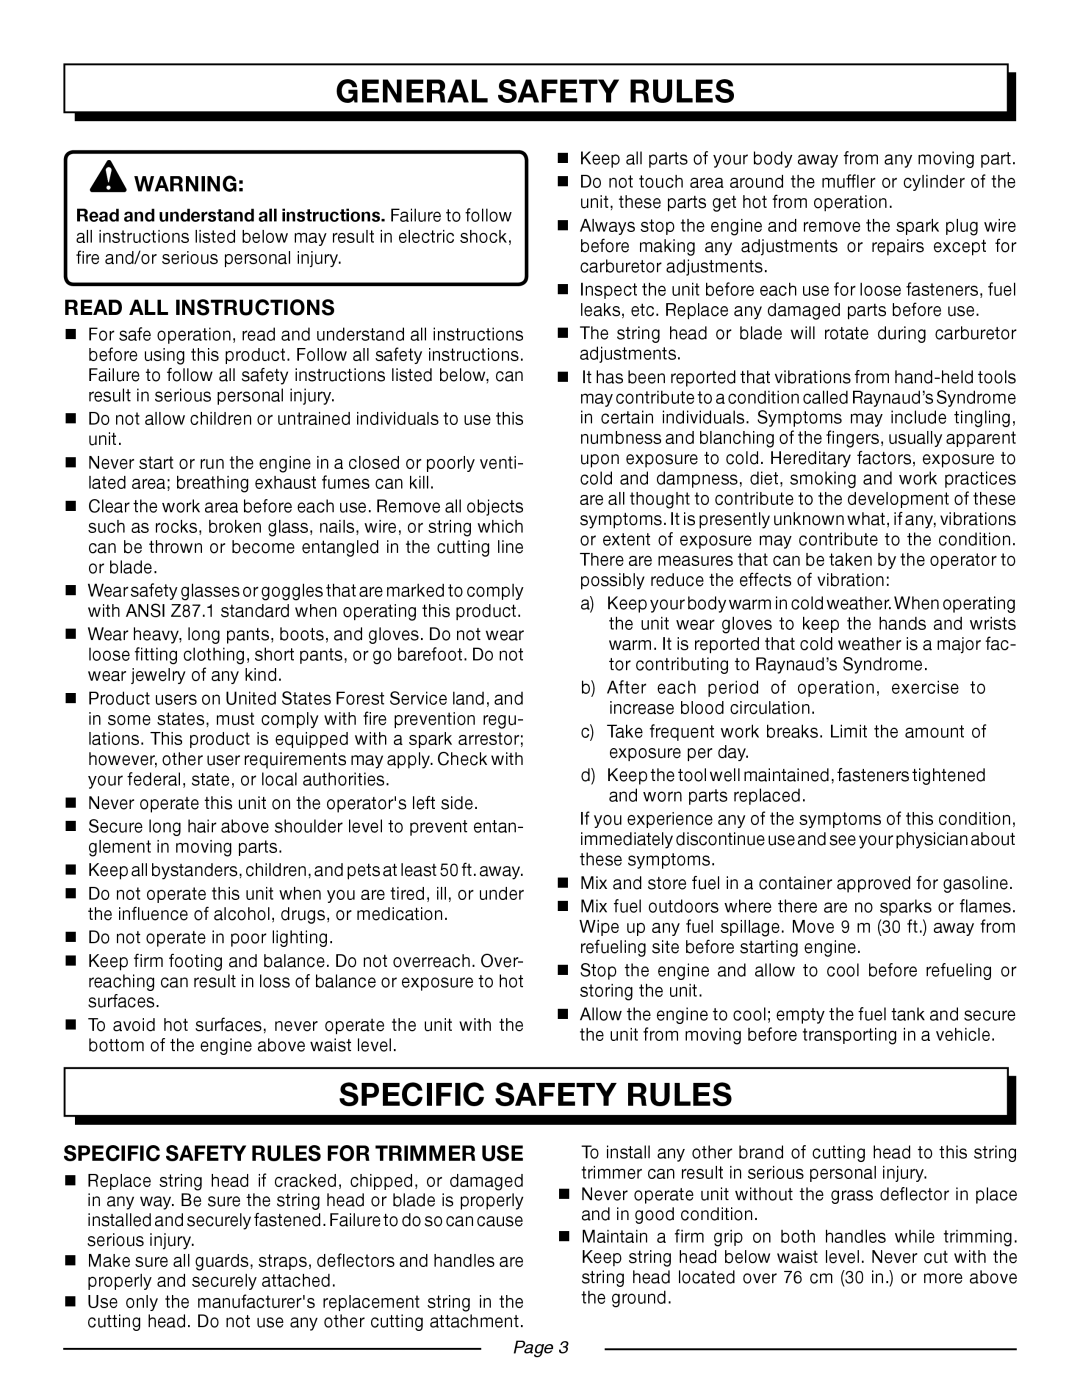 Homelite UT20024B, UT20004B manual General Safety Rules, Specific Safety Rules, Read All Instructions, Page 